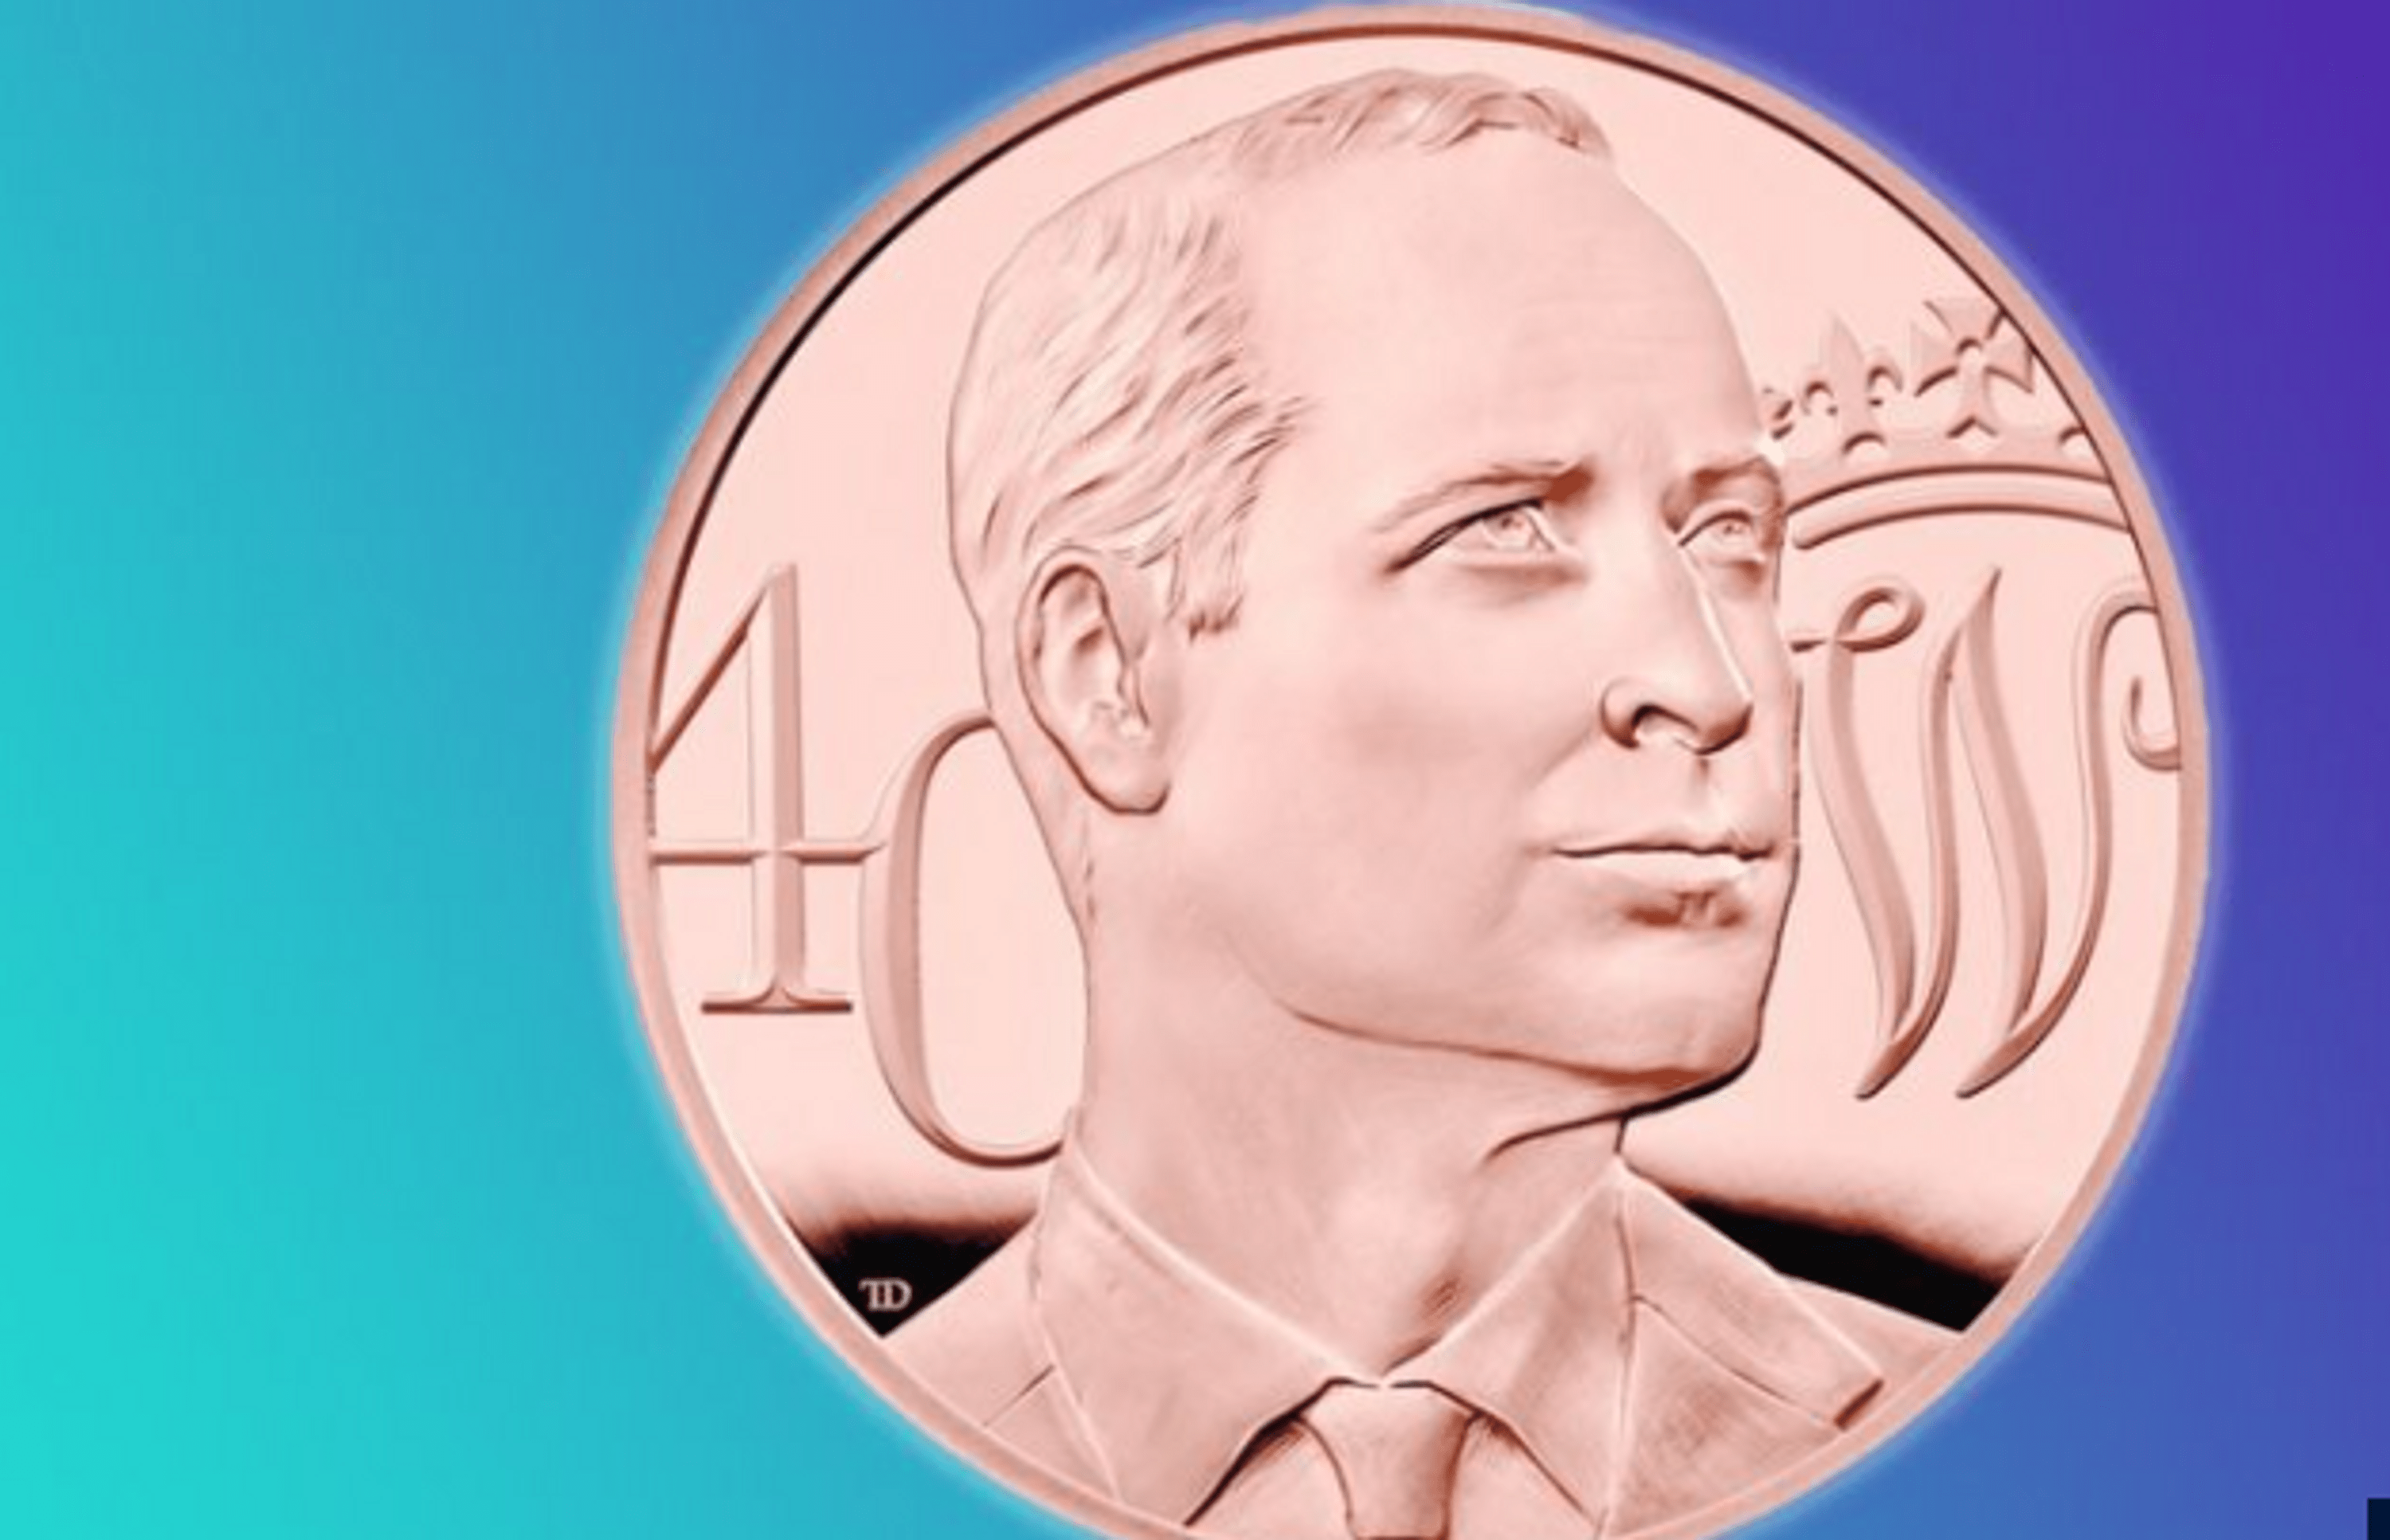 Commemorative coin to be issued to celebrate Prince William's 40th birthday